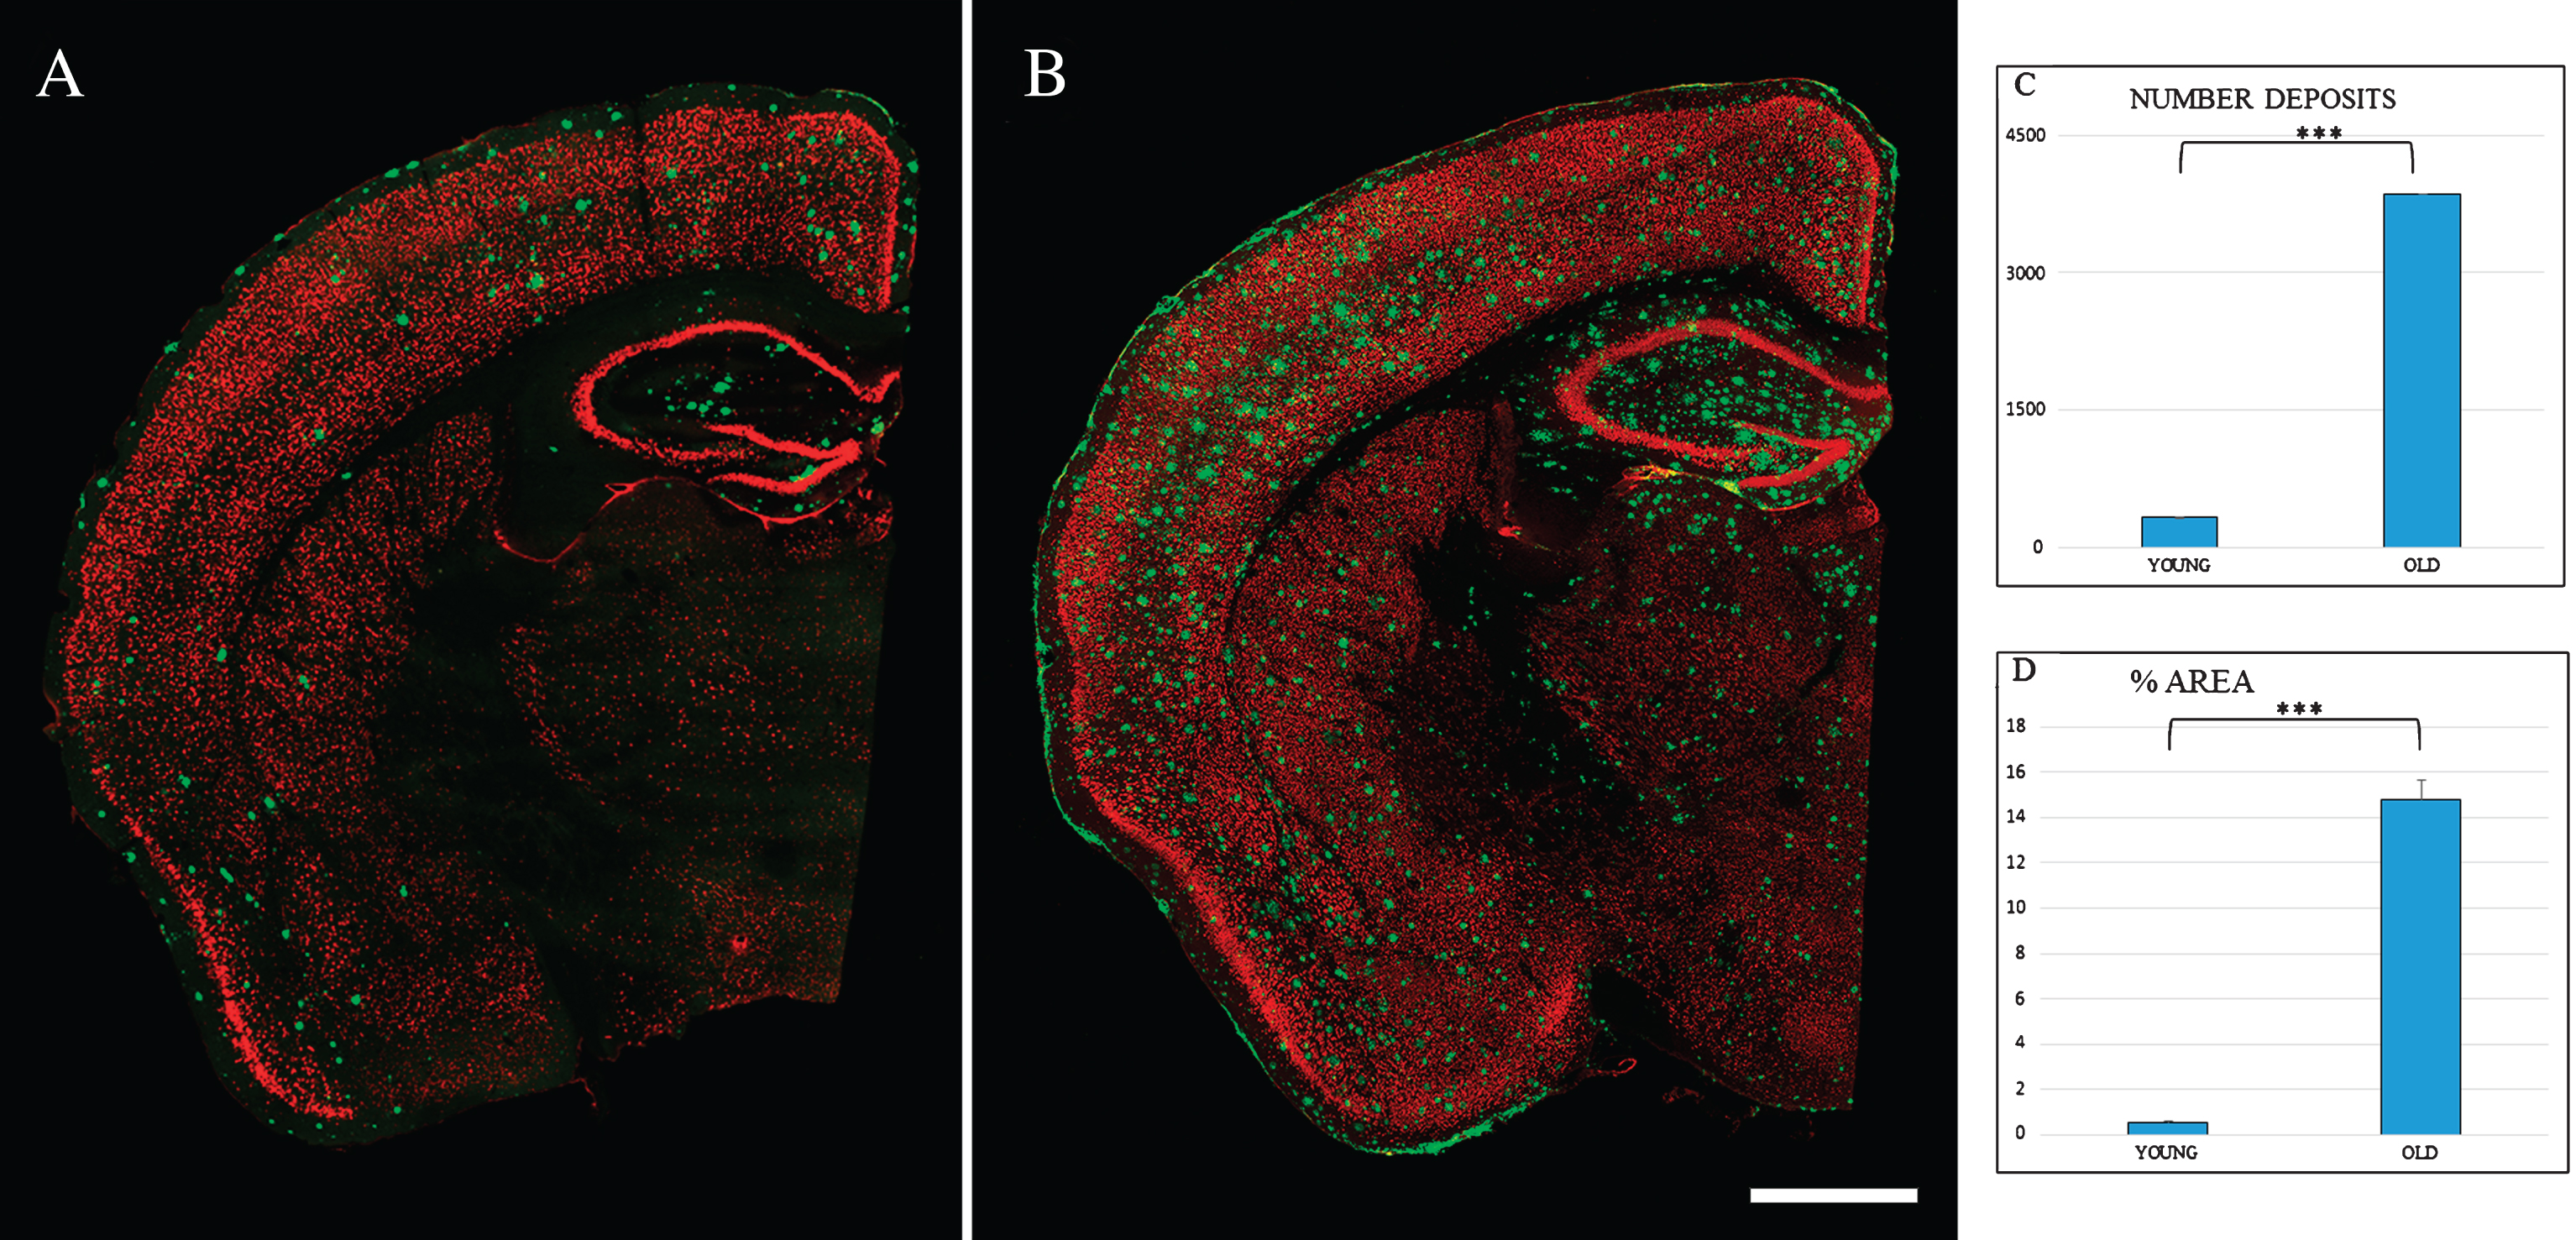 Spatial distribution Aβ-deposits in entorhinal cortex in APPswe/PS1dE9 mice at different ages. Expression of NeuN (red) and antiAβ (green) antibodies. 6-month-old mice (A), 24-month- old mice (B). Coronal section, bars 50μm. C) t-test number of Aβ-deposits in entorhinal cortex in young (324.733±28.747) versus old (3854.867±252.844) ***p < 0.001. D) t-test % area in young (0.539±0.069) versus old (14.801±0.866) ***p < 0.001.